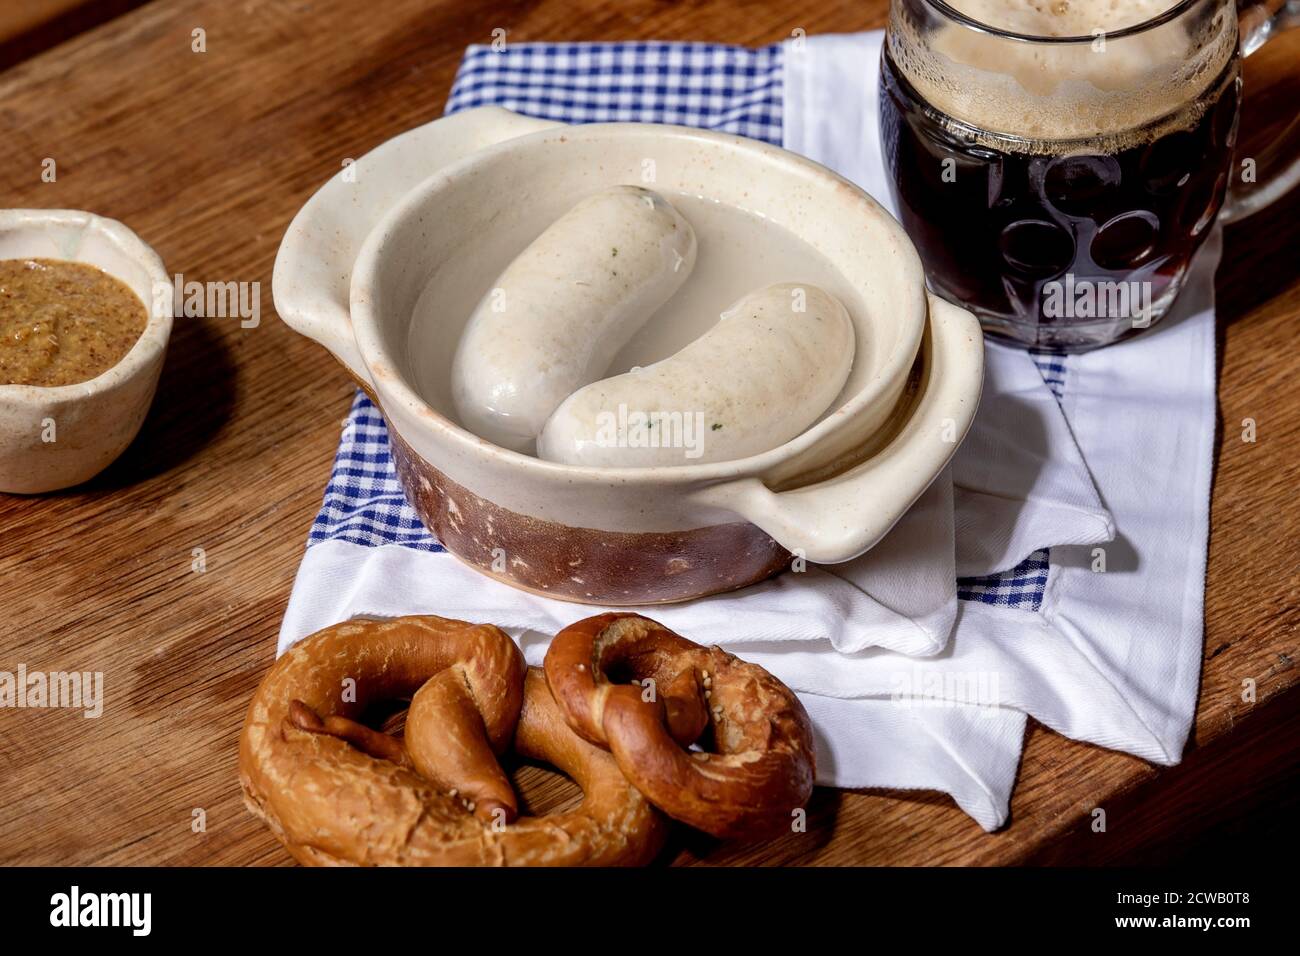 Munich Bavarian traditional white sausages in ceramic pan served with german sweet mustard, mug of dark beer and pretzels bread on white and blue napk Stock Photo